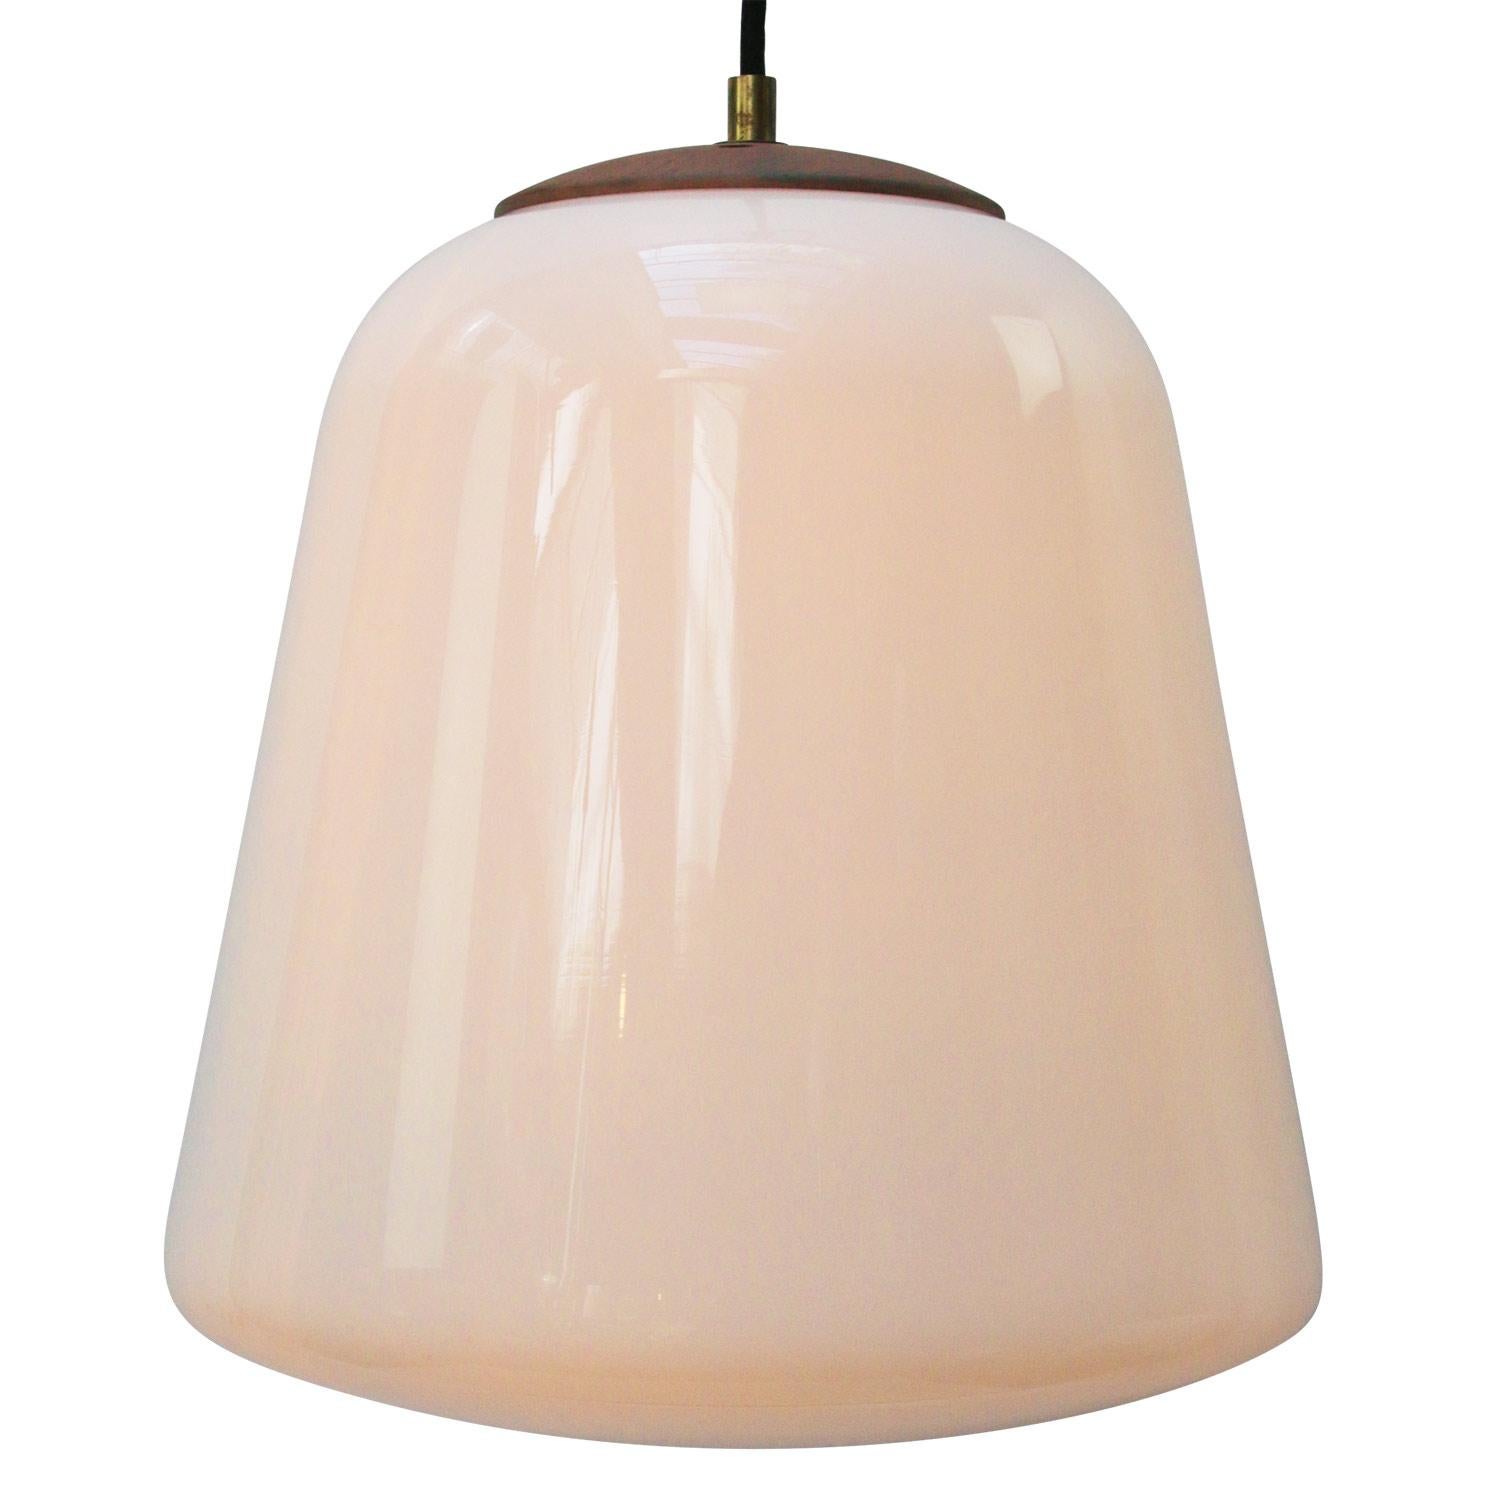 Opaline milk glass pendant.
2 meter black wire

Weight: 1.60 kg / 3.5 lb

Priced per individual item. All lamps have been made suitable by international standards for incandescent light bulbs, energy-efficient and LED bulbs. E26/E27 bulb